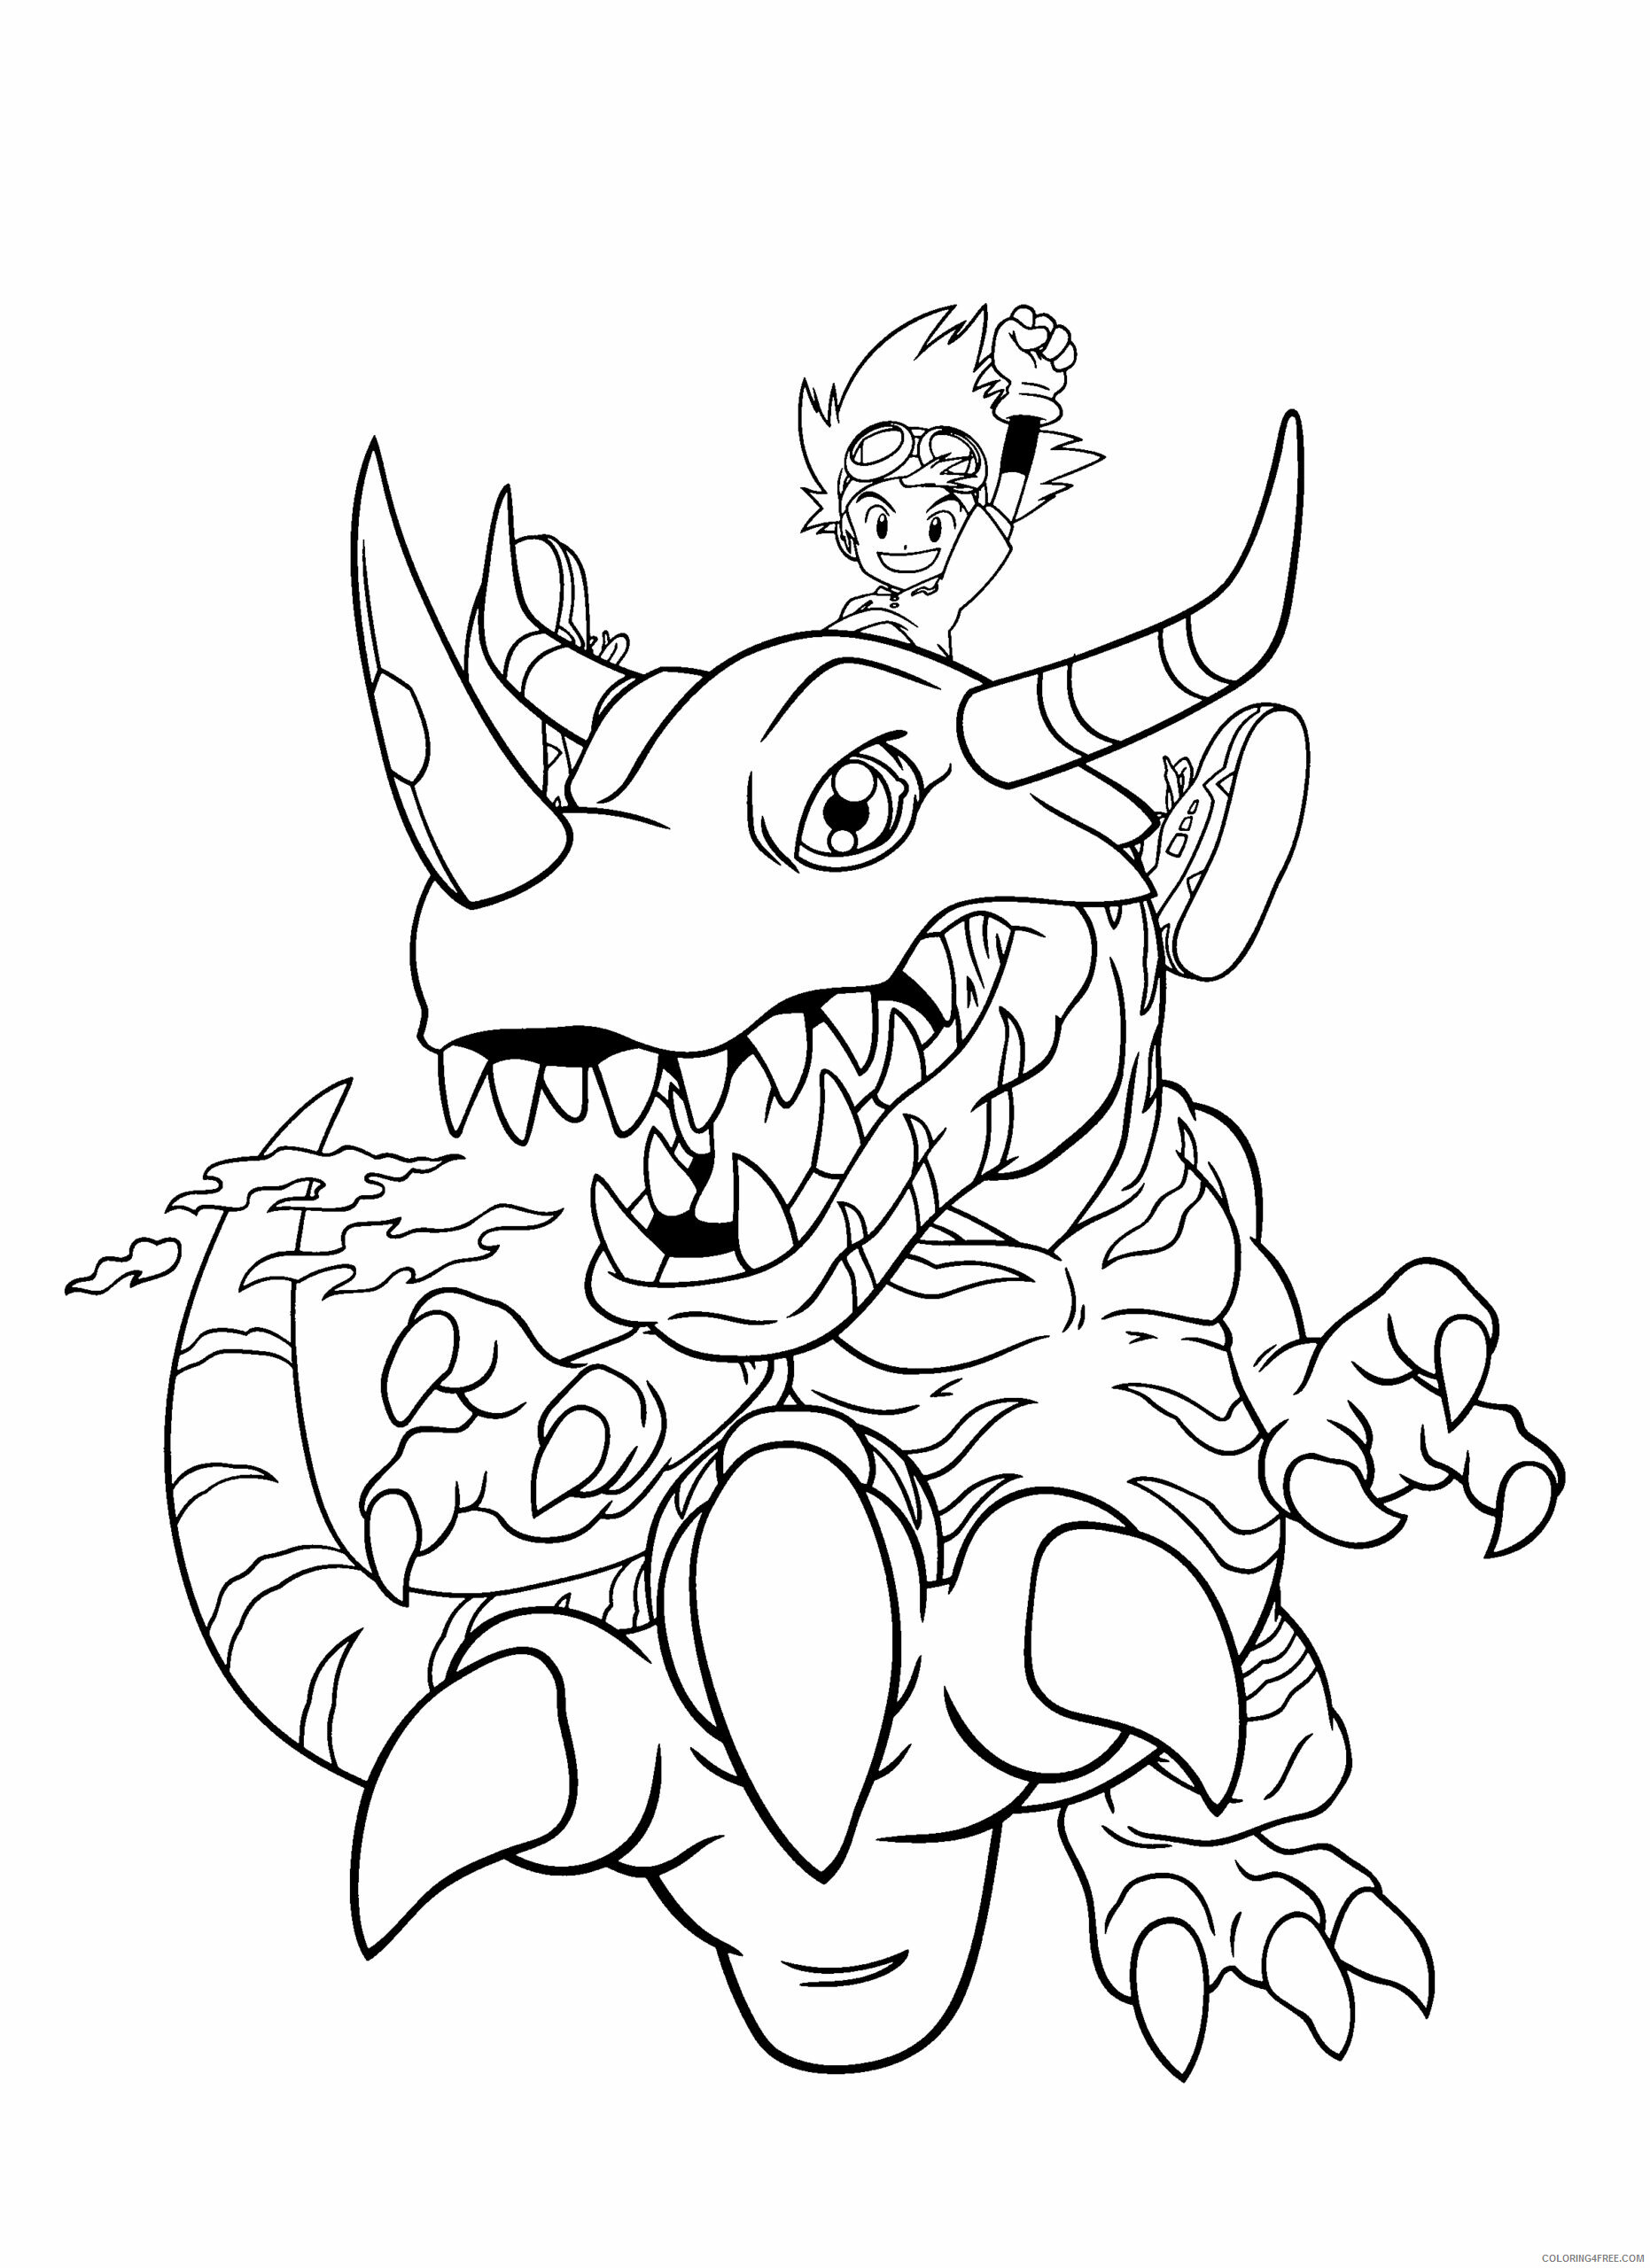 Digimon Printable Coloring Pages Anime digimon 1Qdsn 2021 0153 Coloring4free